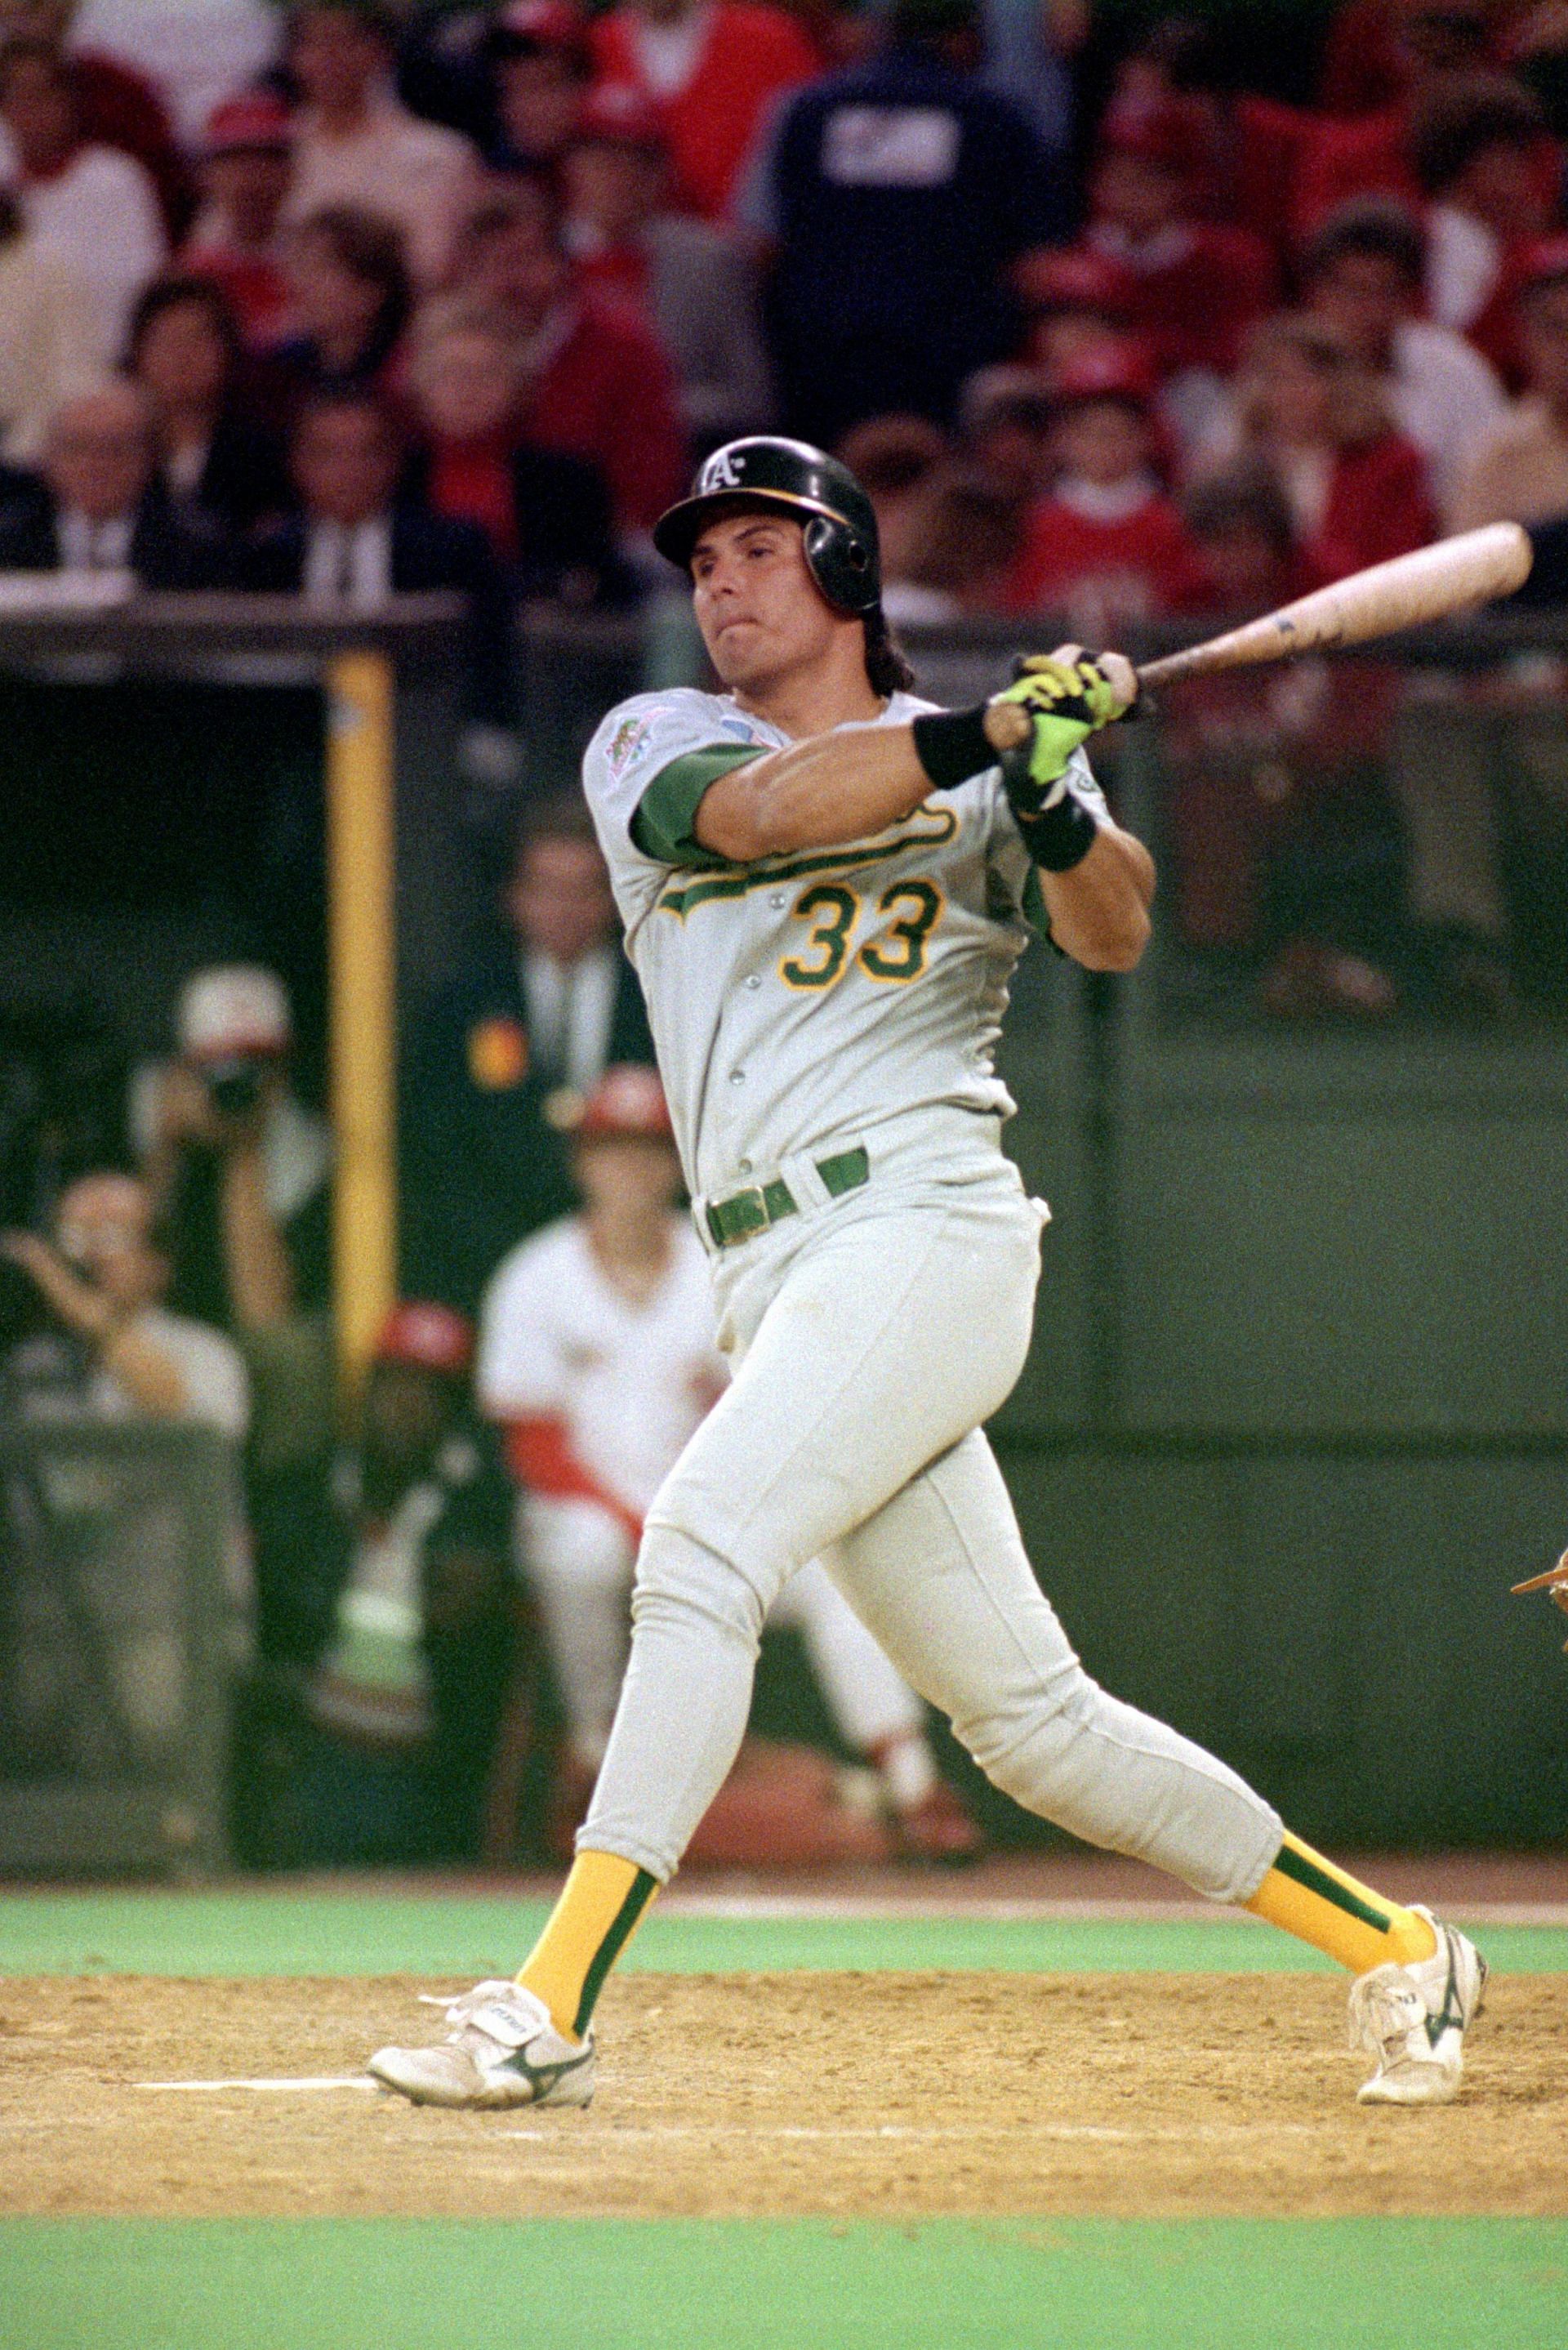 Jose Canseco of the Oakland Athletics